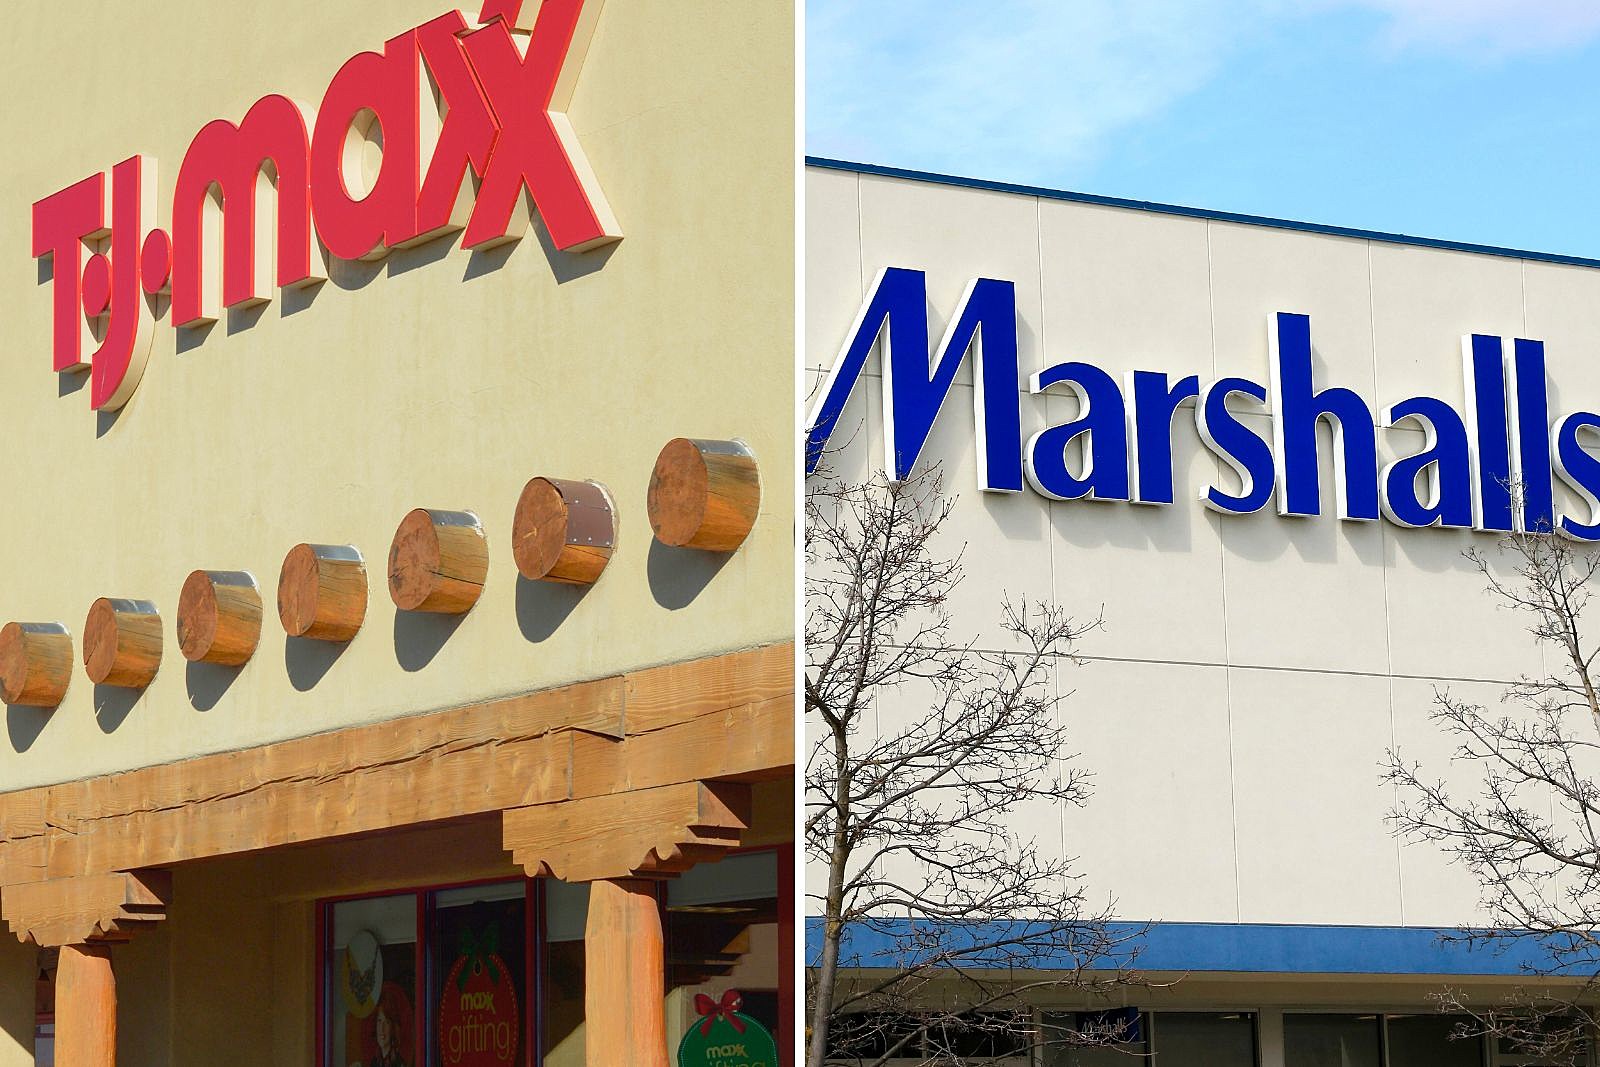 In 2011, T.J. Maxx in  Fashion Bug out